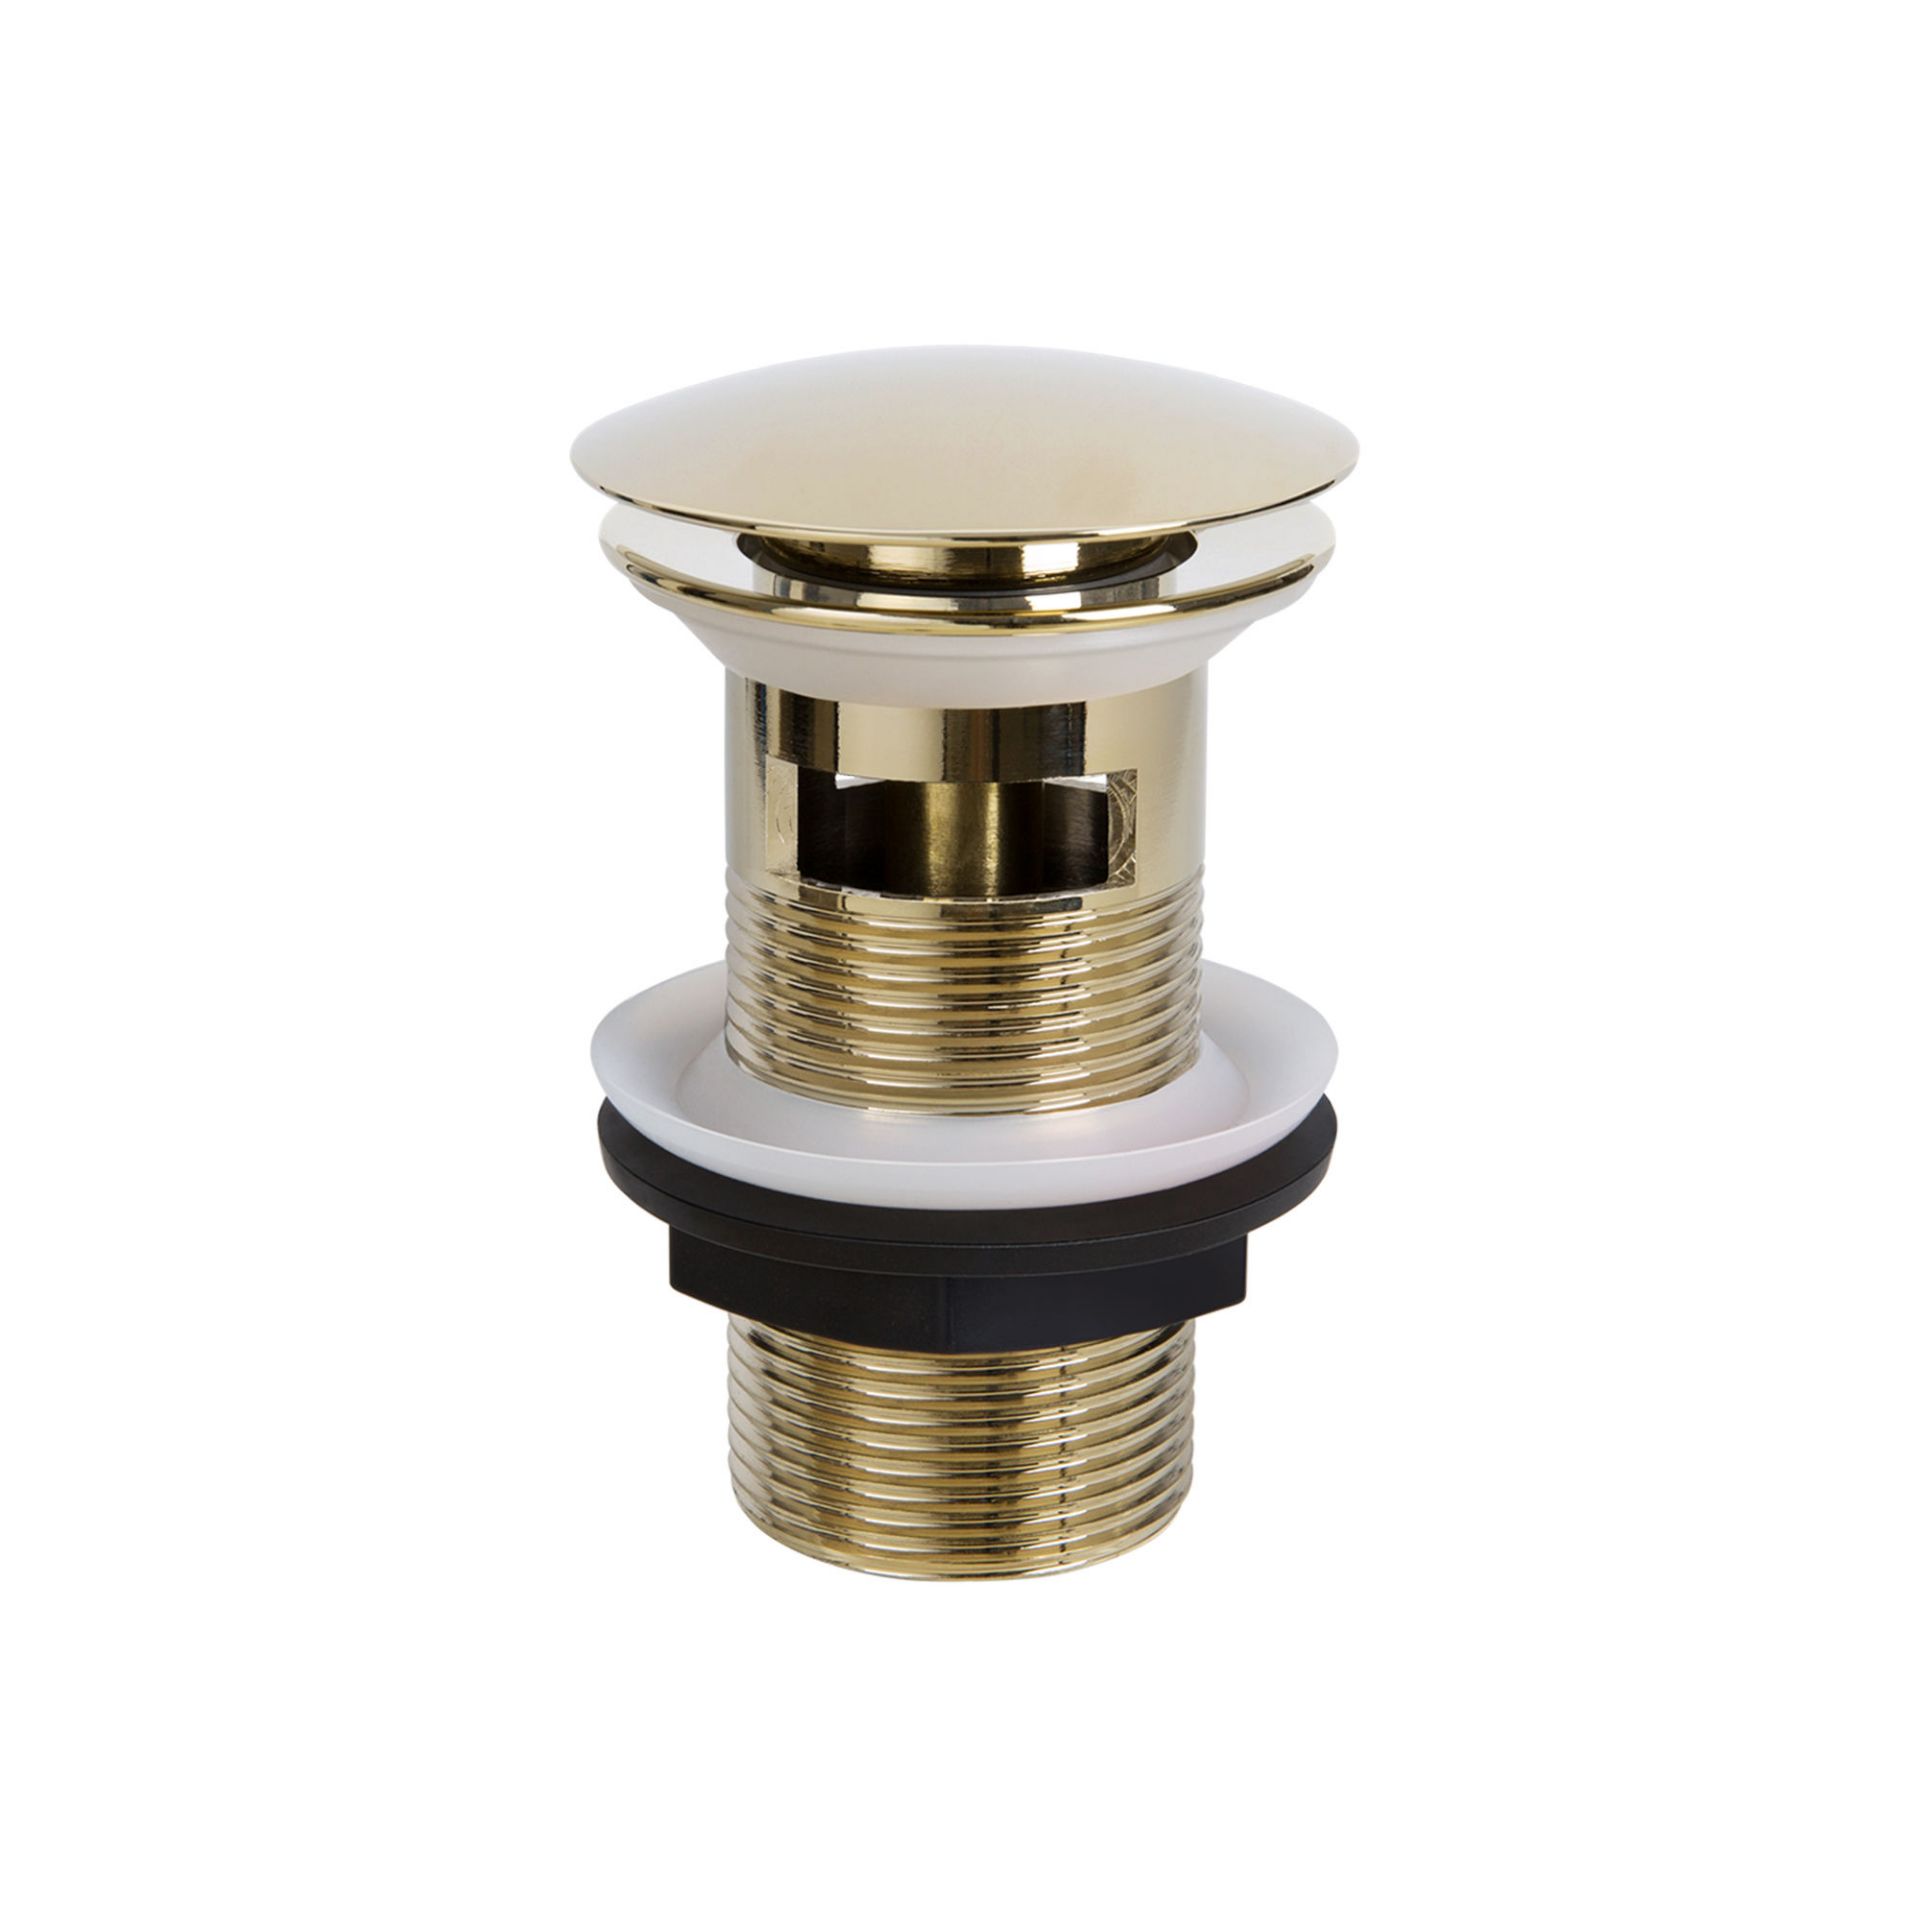 (V26) Valletta Gold Slotted Push Button Pop-Up Basin Waste Made with zinc with solid brass